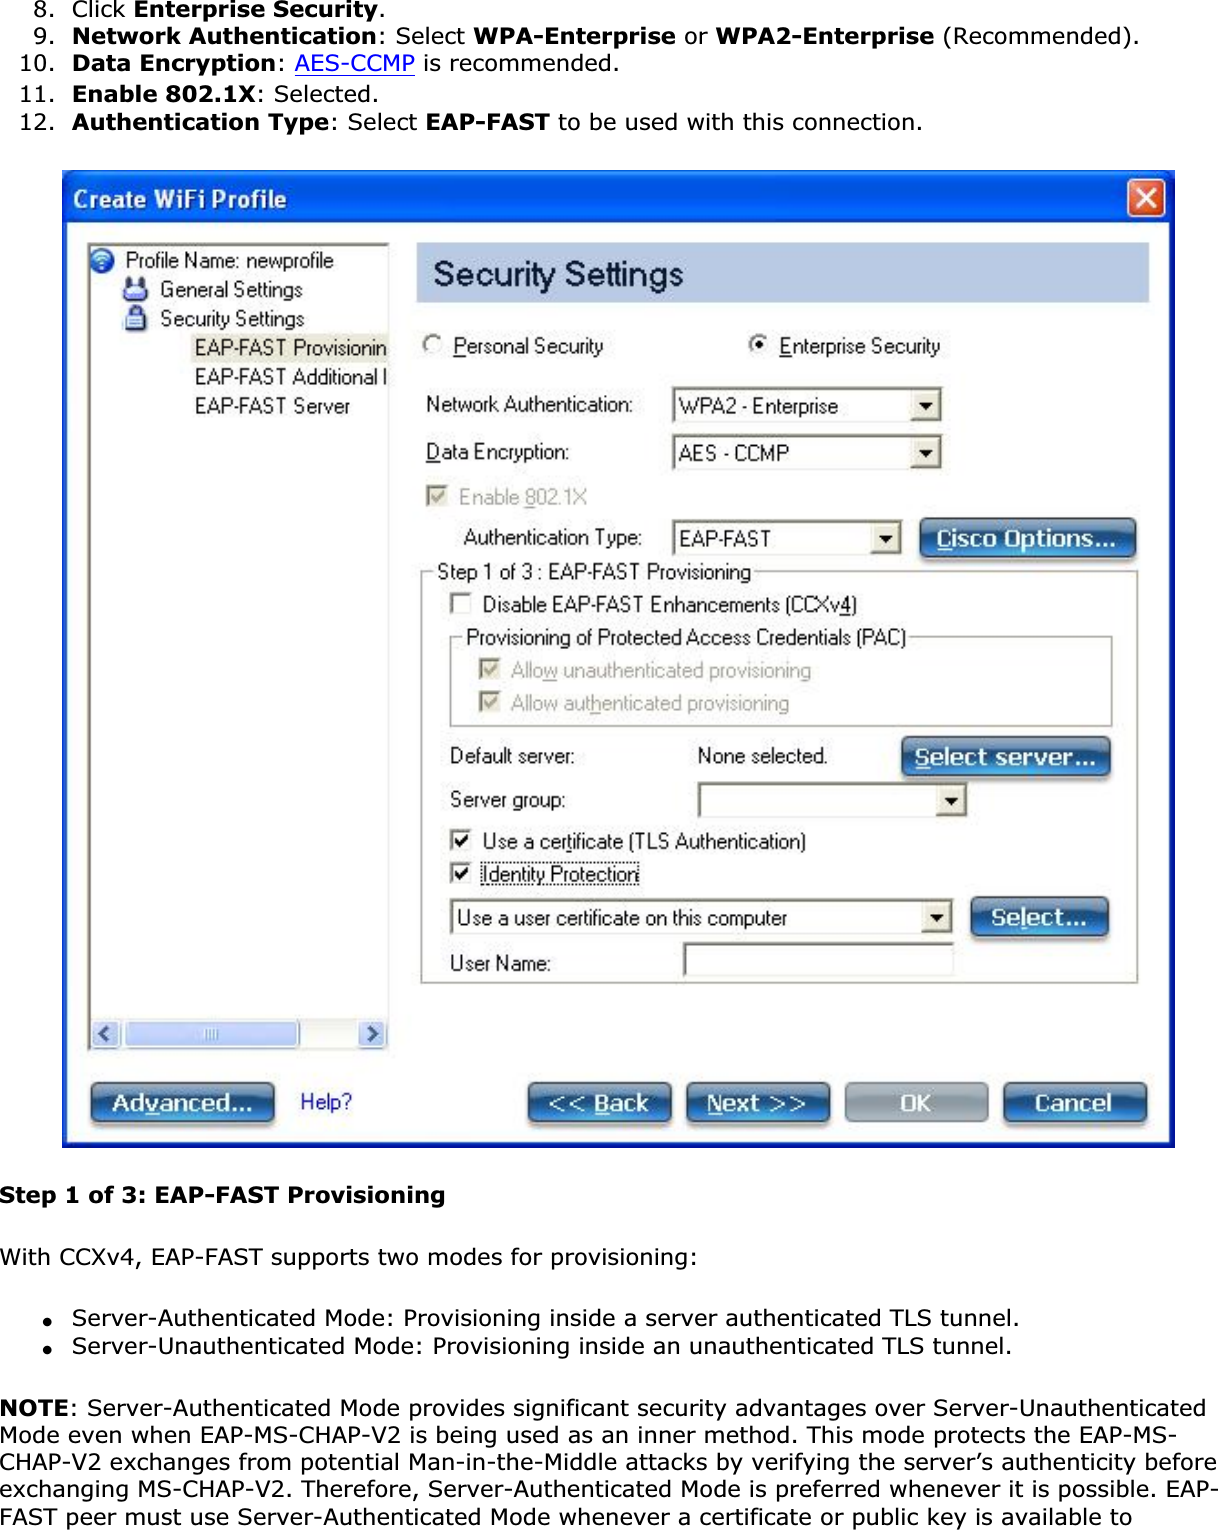 8. Click Enterprise Security.9. Network Authentication: Select WPA-Enterprise or WPA2-Enterprise (Recommended).10. Data Encryption:AES-CCMP is recommended.11. Enable 802.1X: Selected.12. Authentication Type: Select EAP-FAST to be used with this connection.Step 1 of 3: EAP-FAST ProvisioningWith CCXv4, EAP-FAST supports two modes for provisioning:●Server-Authenticated Mode: Provisioning inside a server authenticated TLS tunnel.●Server-Unauthenticated Mode: Provisioning inside an unauthenticated TLS tunnel.NOTE: Server-Authenticated Mode provides significant security advantages over Server-Unauthenticated Mode even when EAP-MS-CHAP-V2 is being used as an inner method. This mode protects the EAP-MS-CHAP-V2 exchanges from potential Man-in-the-Middle attacks by verifying the server’s authenticity before exchanging MS-CHAP-V2. Therefore, Server-Authenticated Mode is preferred whenever it is possible. EAP-FAST peer must use Server-Authenticated Mode whenever a certificate or public key is available to 